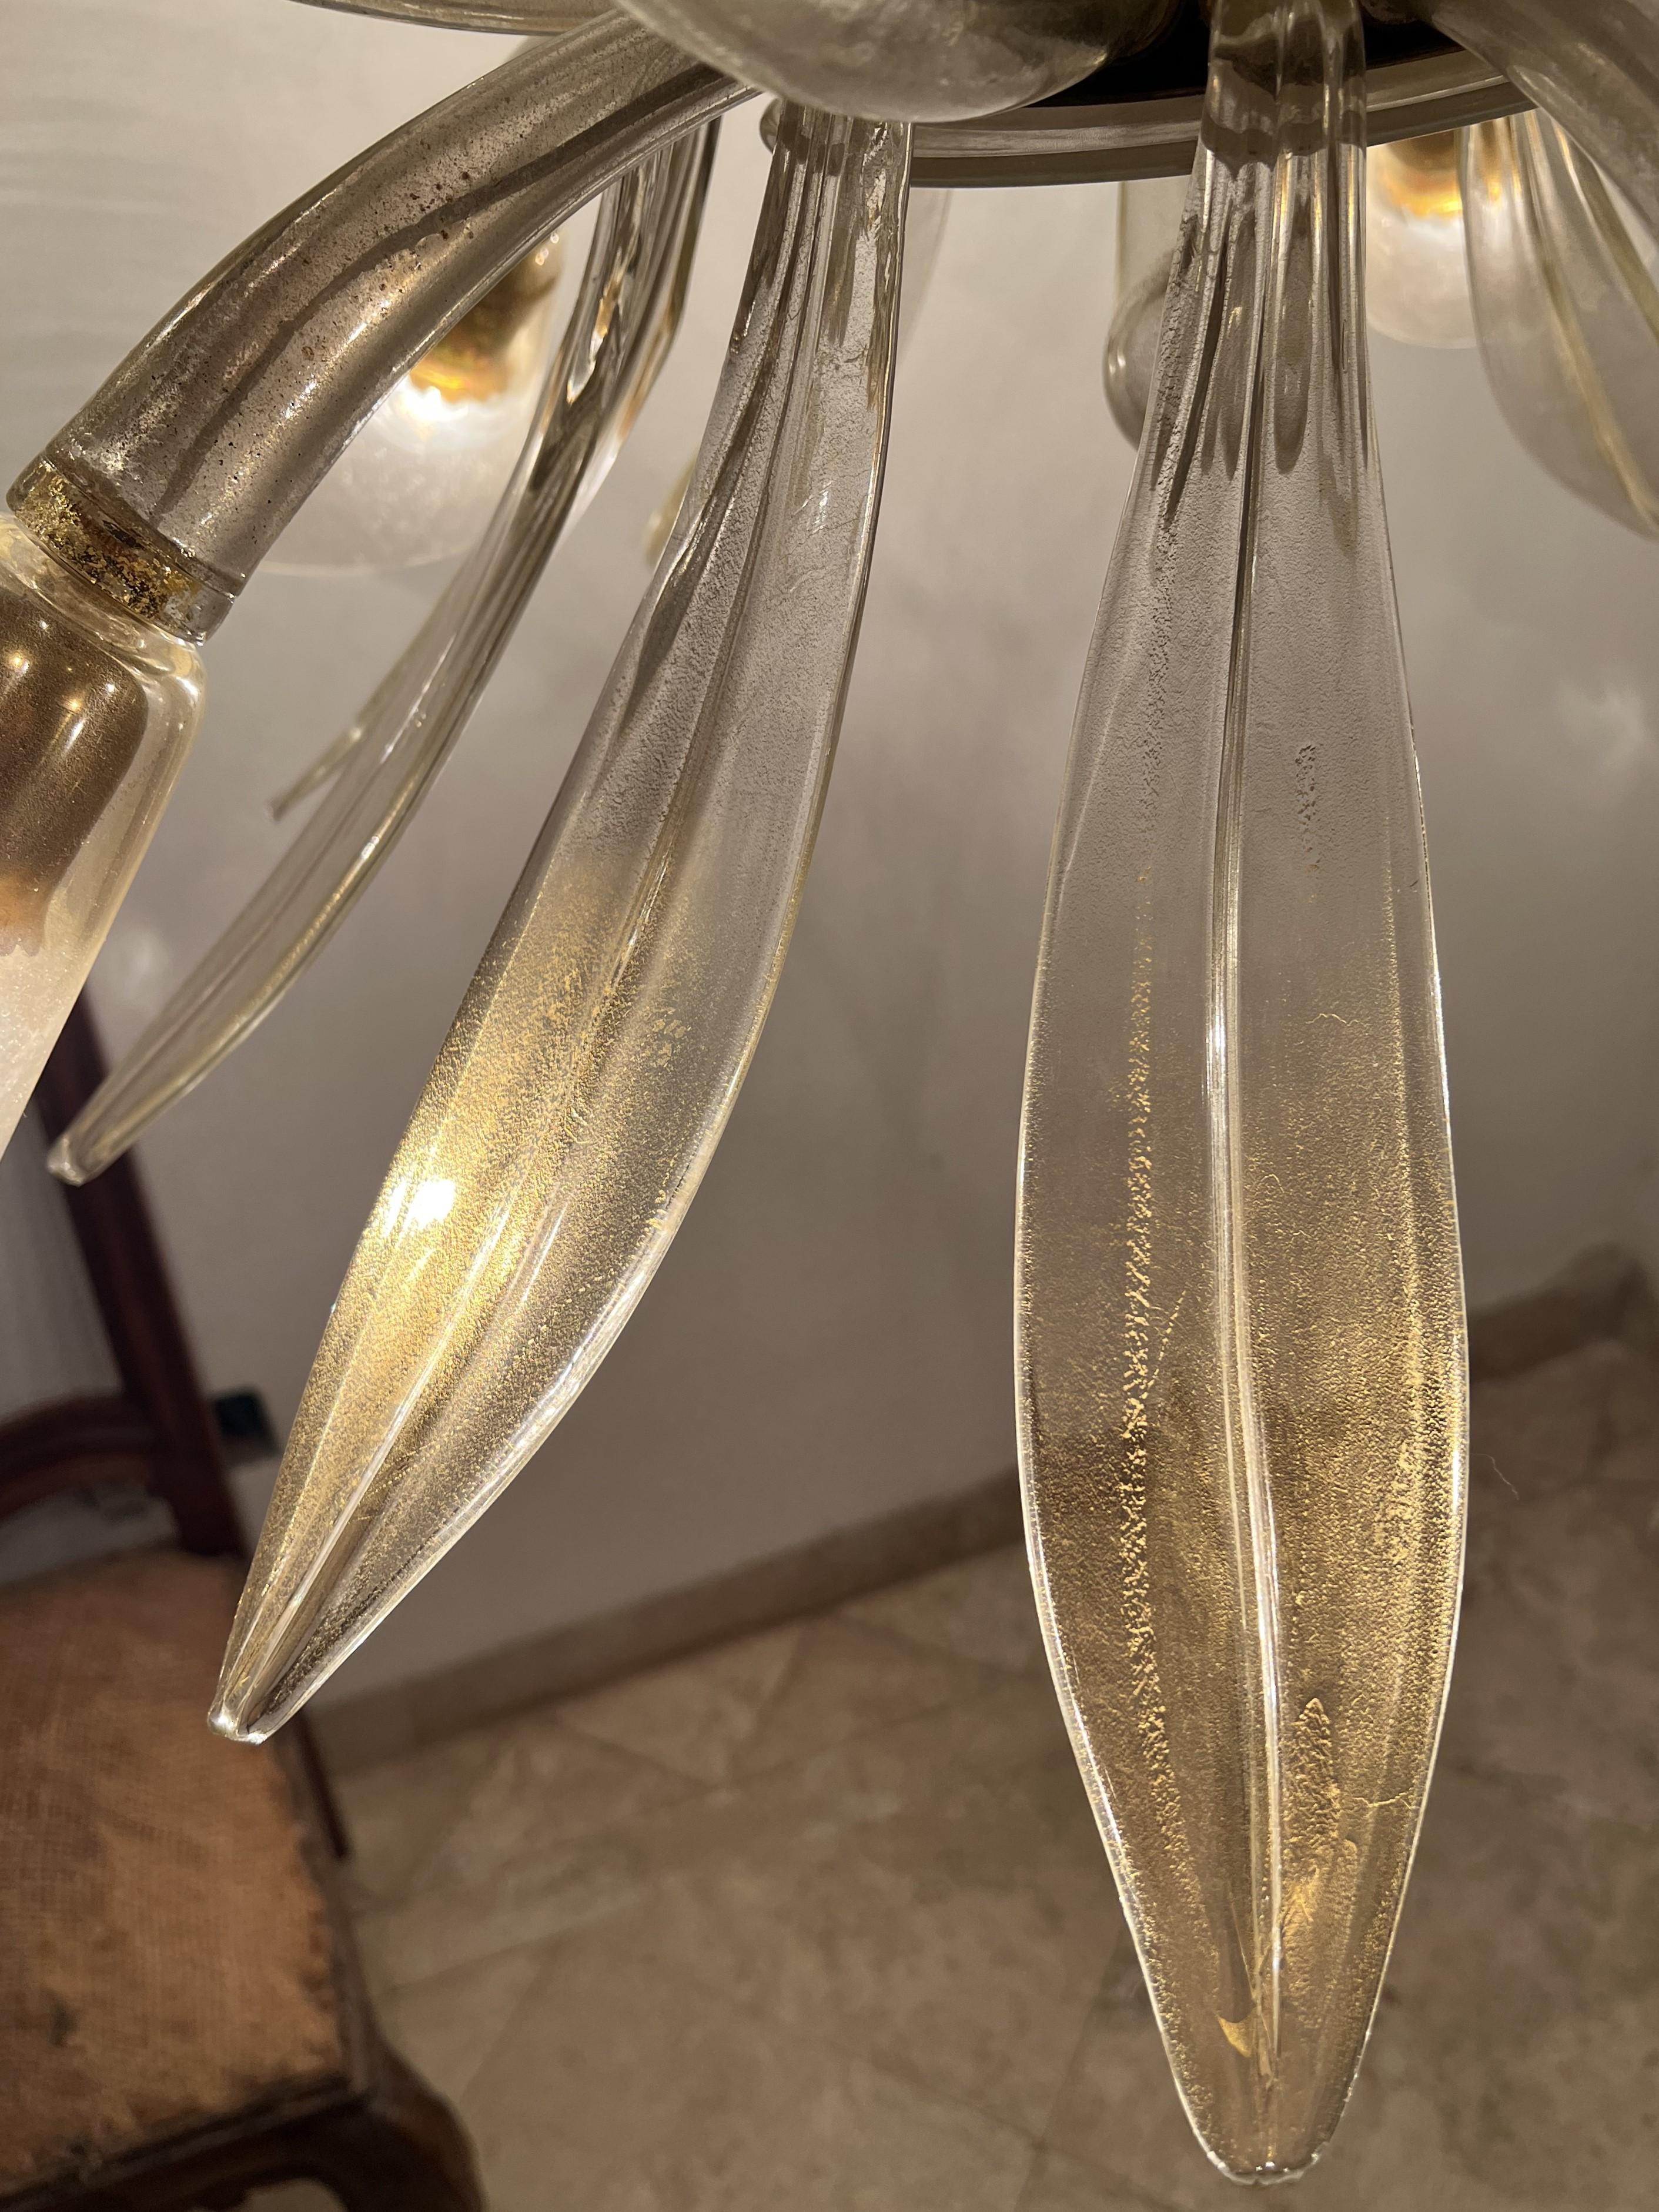 Pair of Art Deco Murano Glass 10 Light Chandeliers attr to Barovier Toso ca 1935 For Sale 9